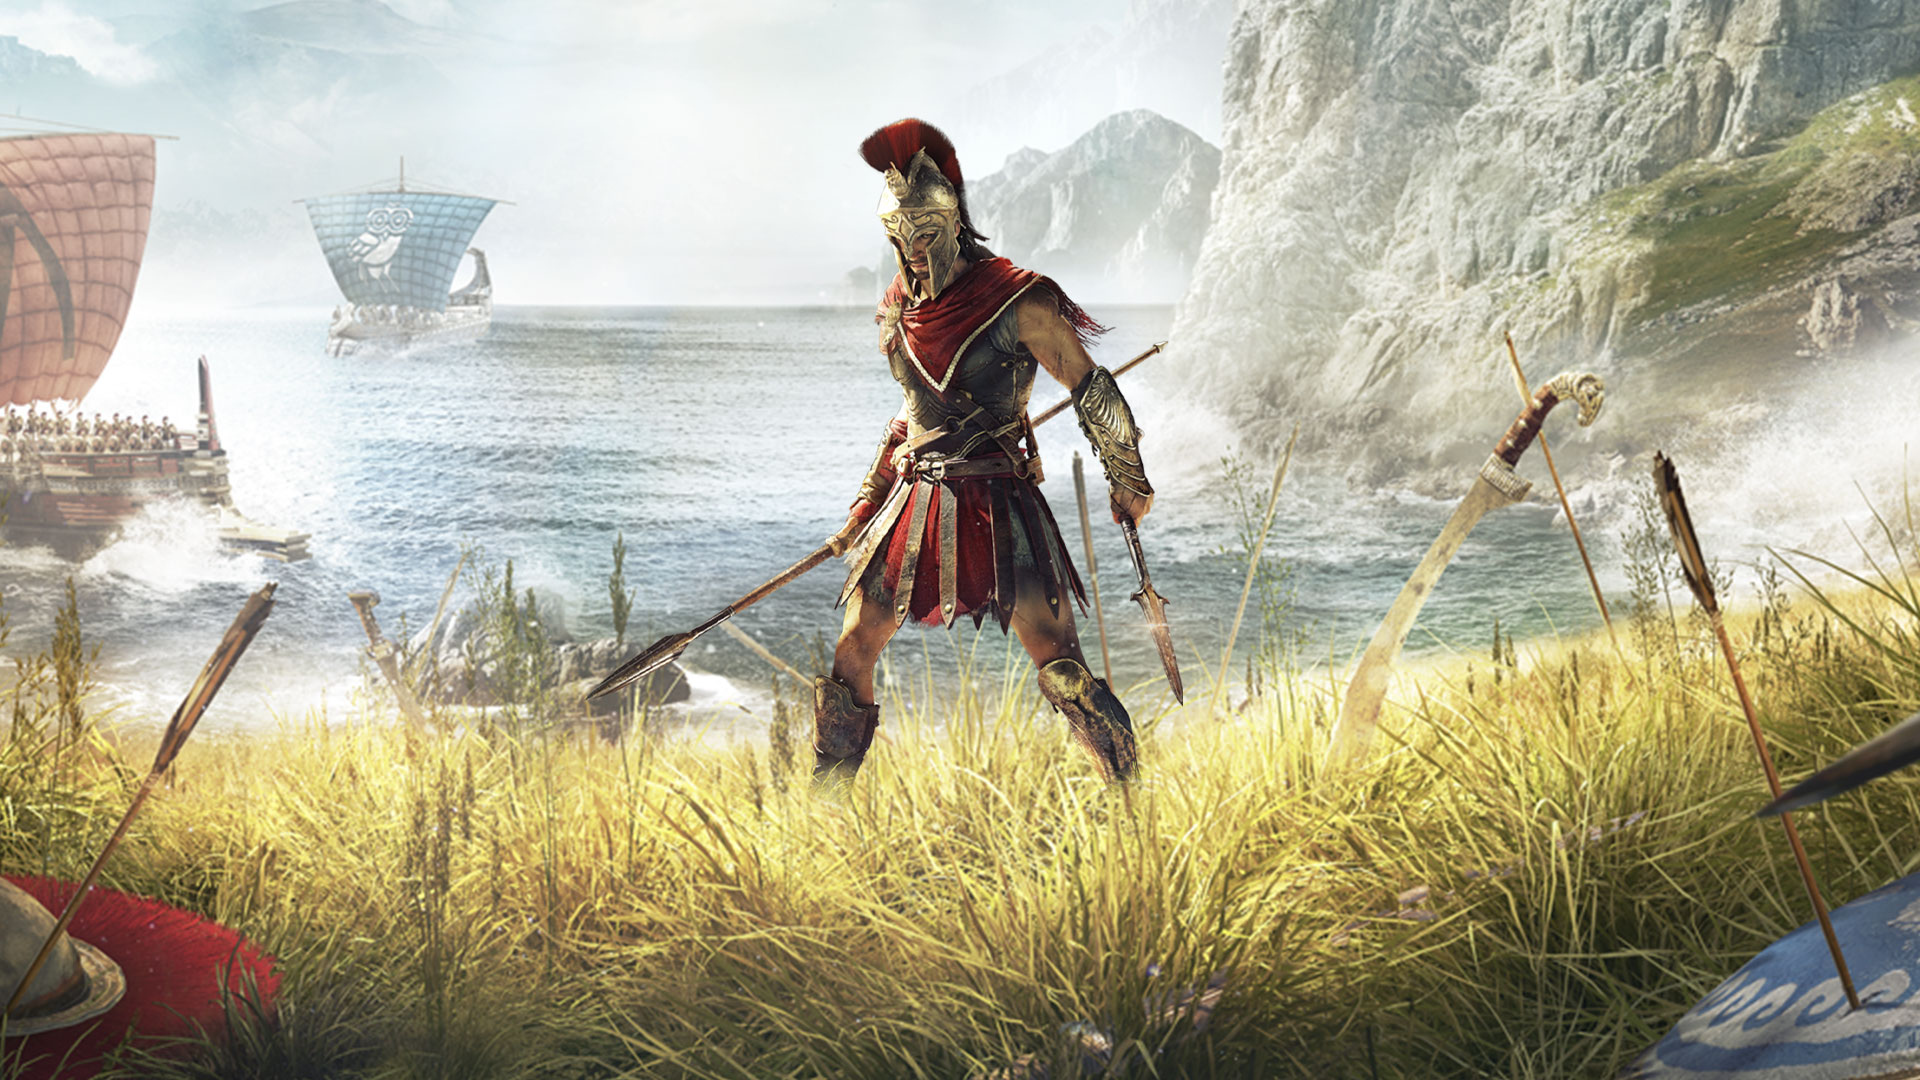 Assassin's Creed Odyssey on PS4, Xbox One, PC | Ubisoft (UK)